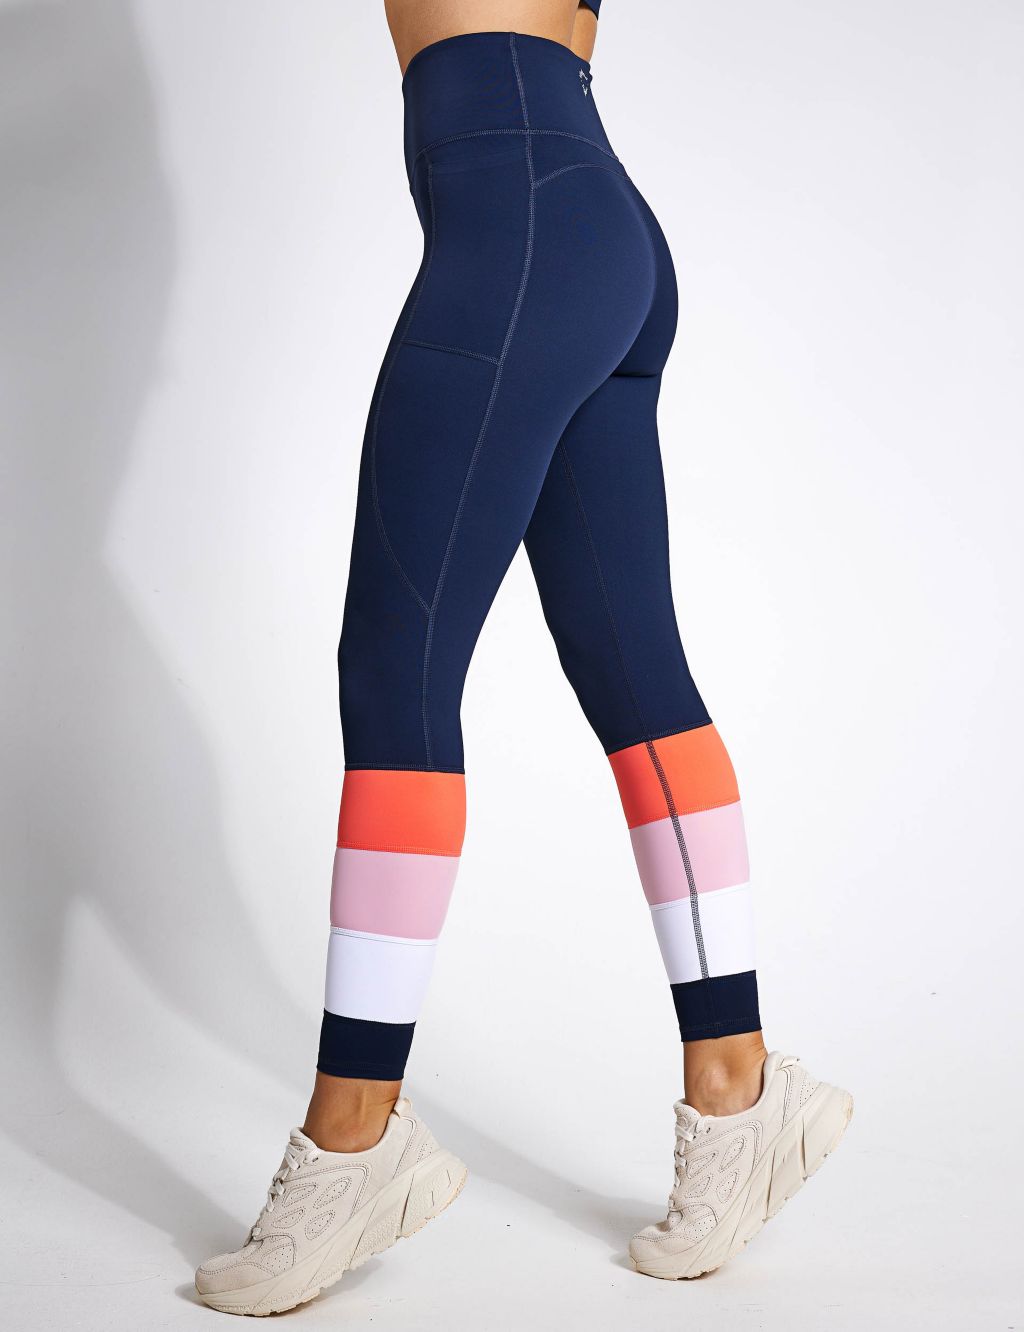 Willow High Waisted Leggings image 2